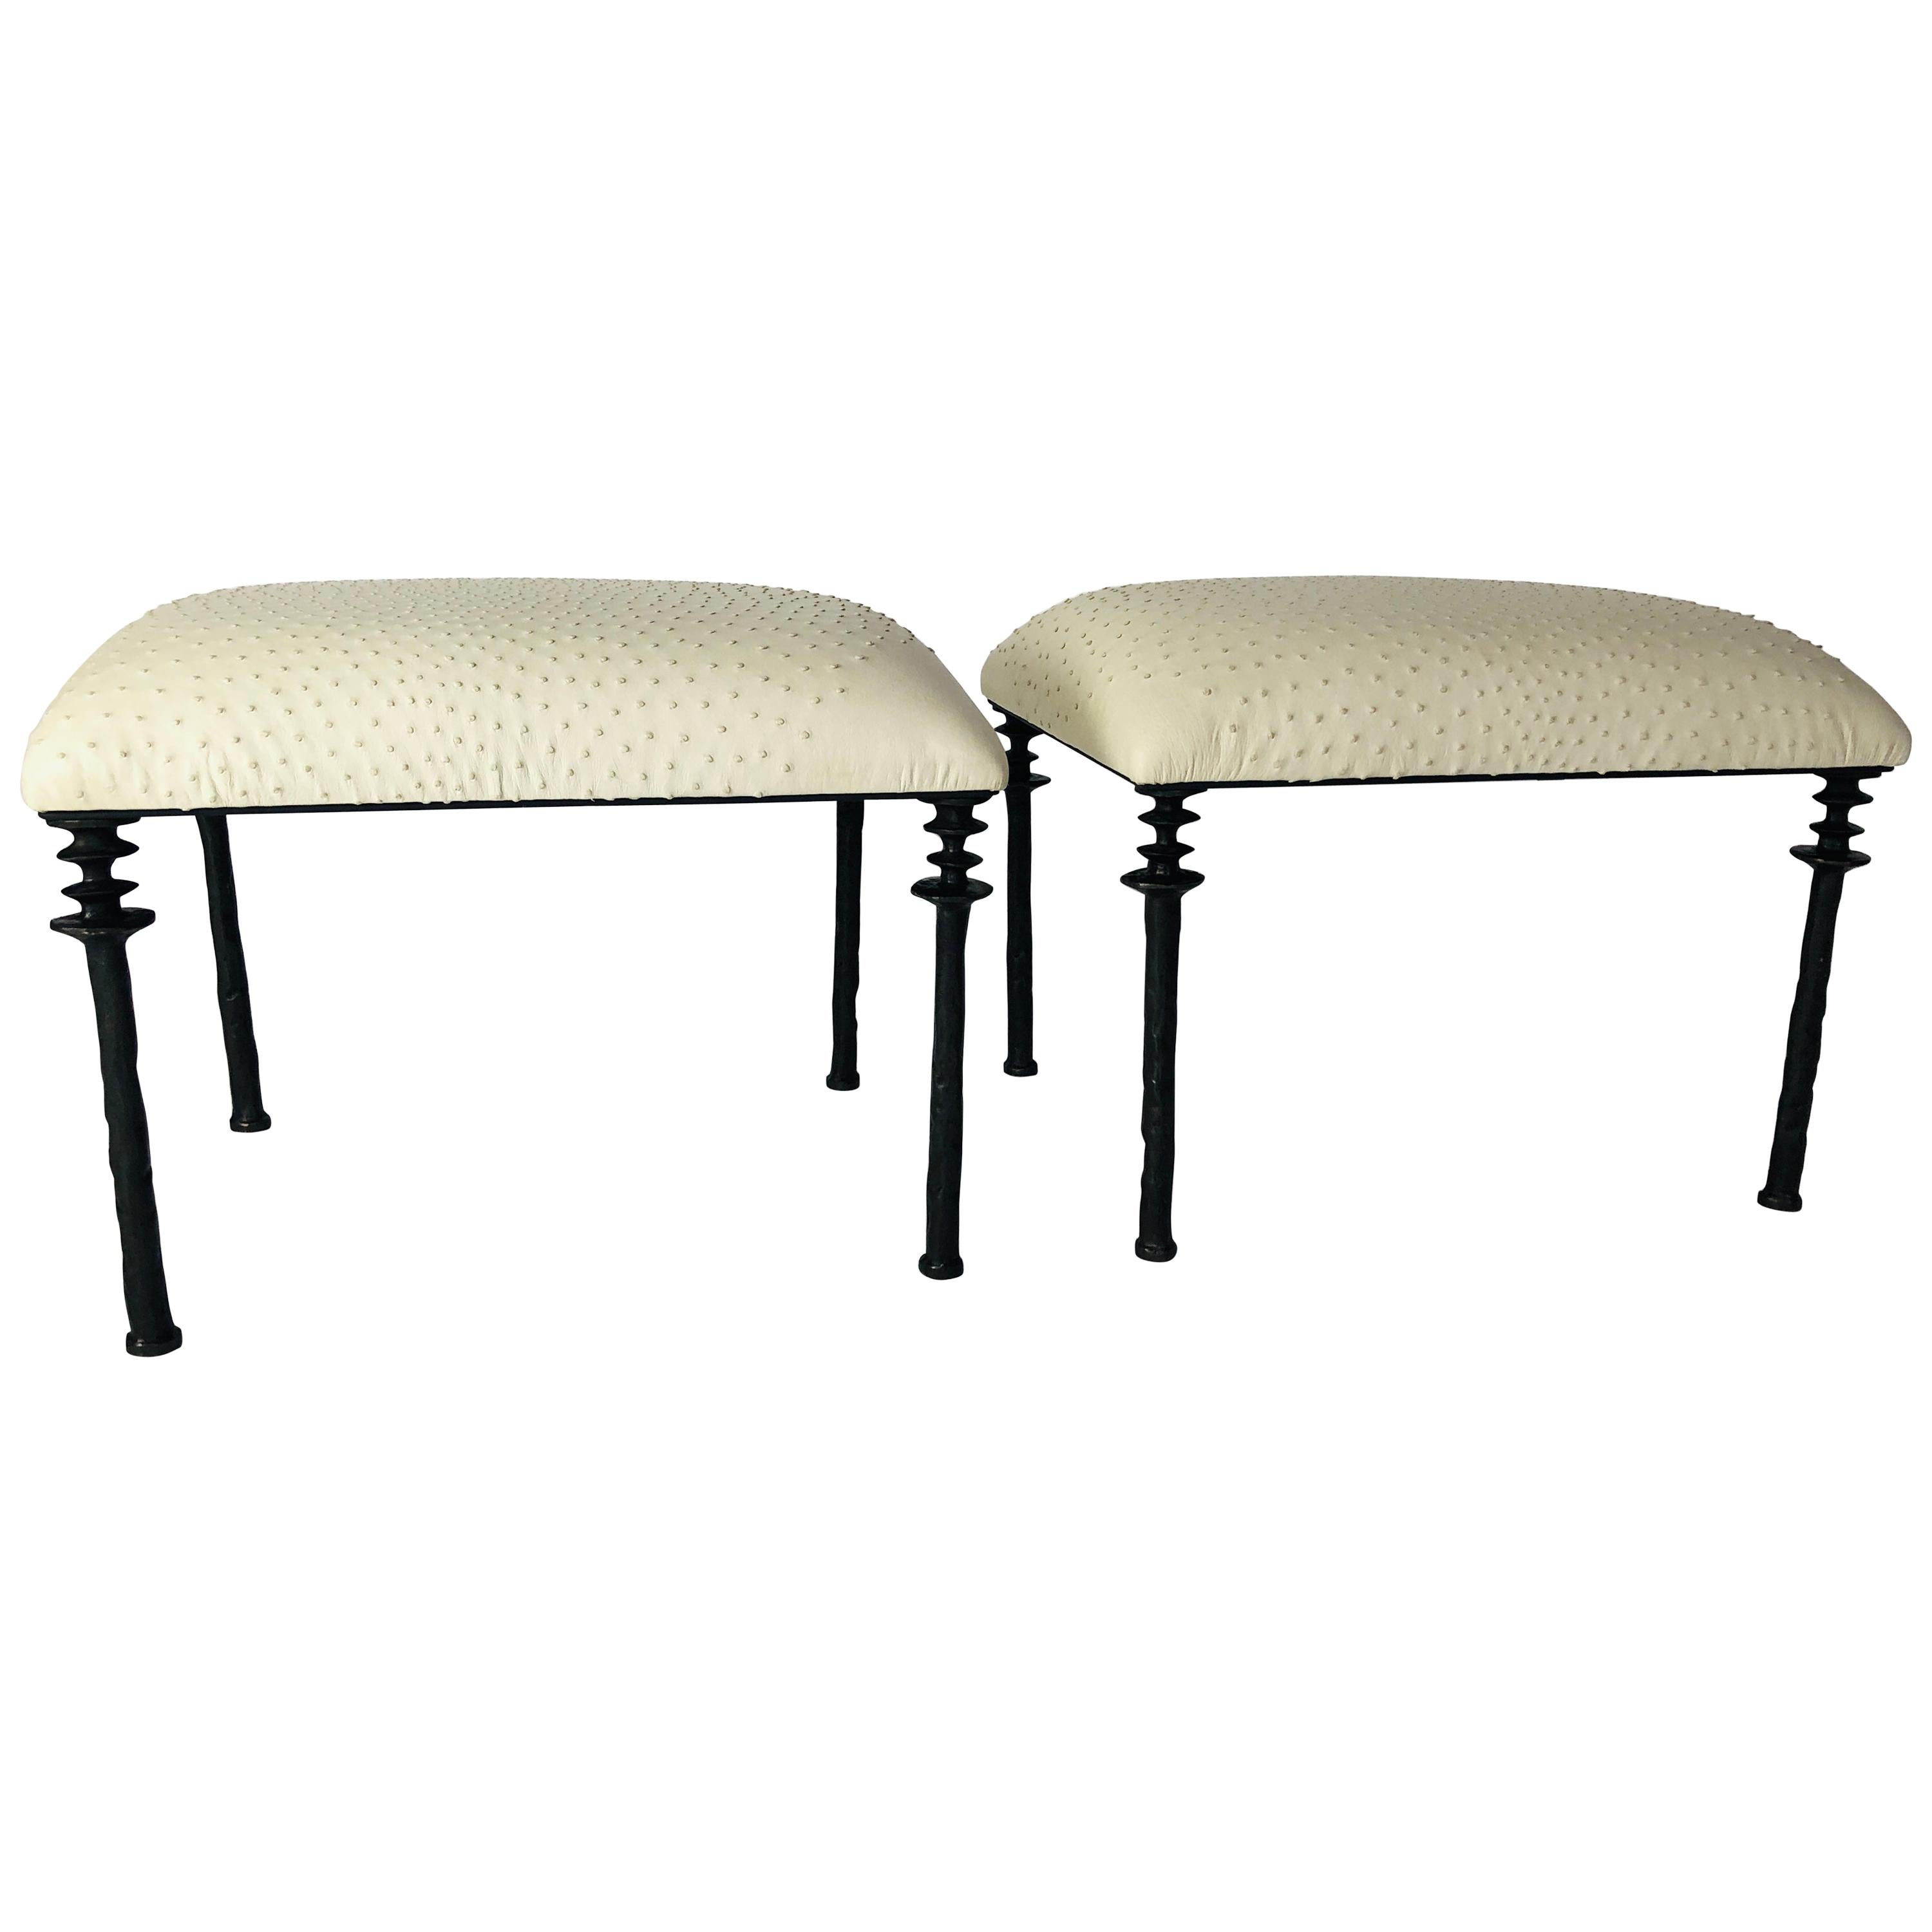 Pair of Sorgue Stools, by Bourgeois Boheme Atelier, Tan Ostrich Leather